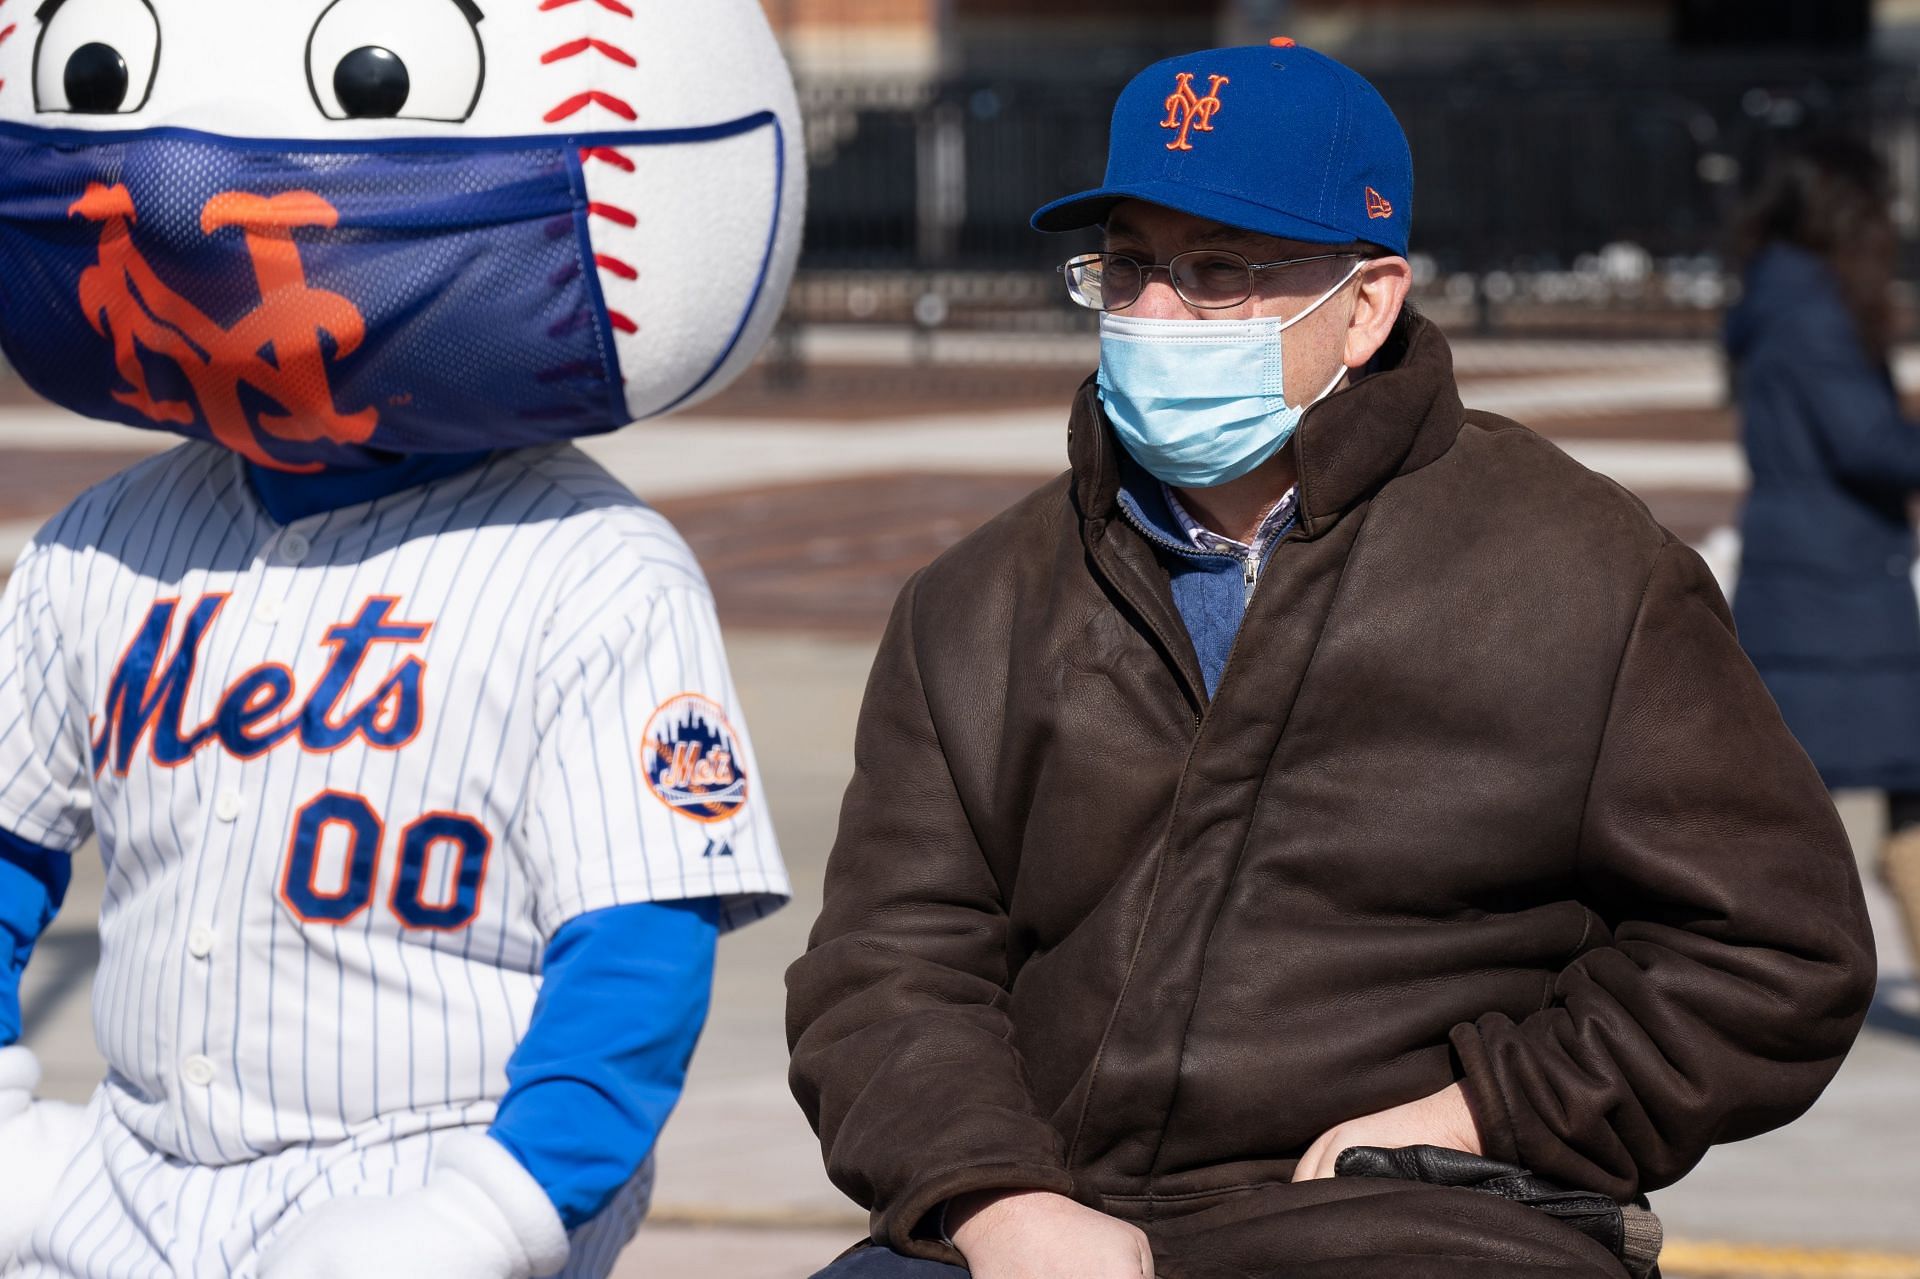 Mets owner Steve Cohen at the opening of the COVID-19 vaccination site at Citi Field on February 10, 2021, in New York City.